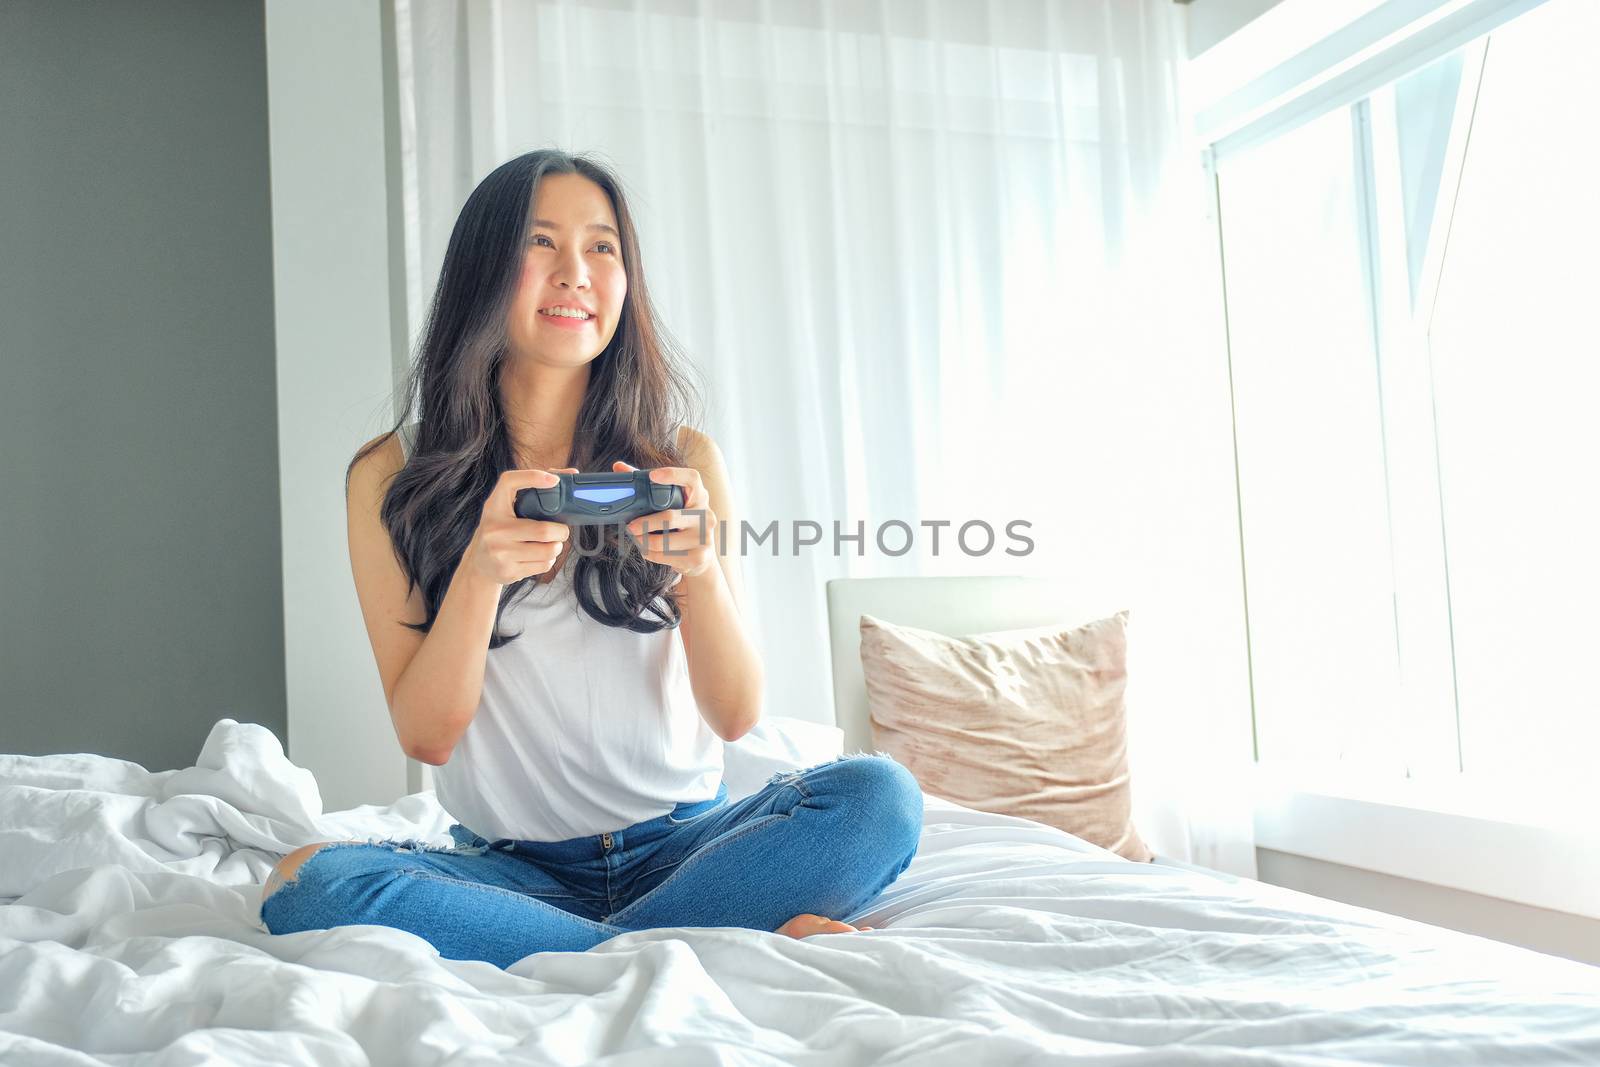 Beautiful girl playing video game on bed